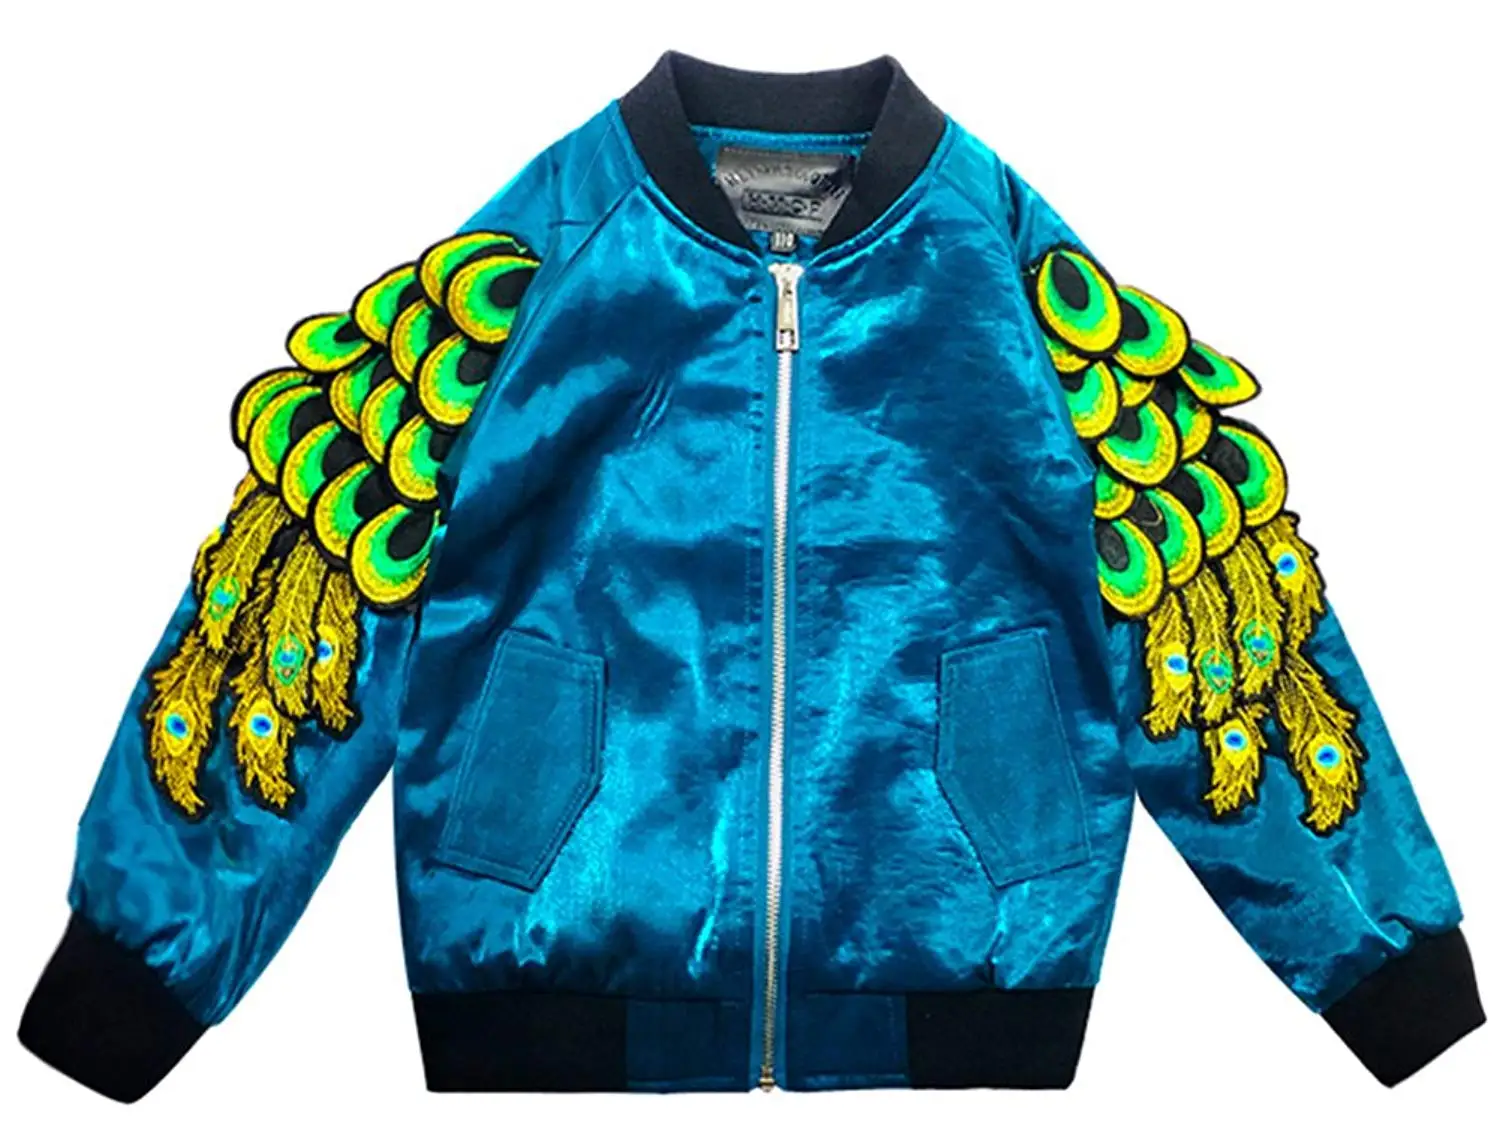 Cheap Coat Peacock, find Coat Peacock deals on line at Alibaba.com